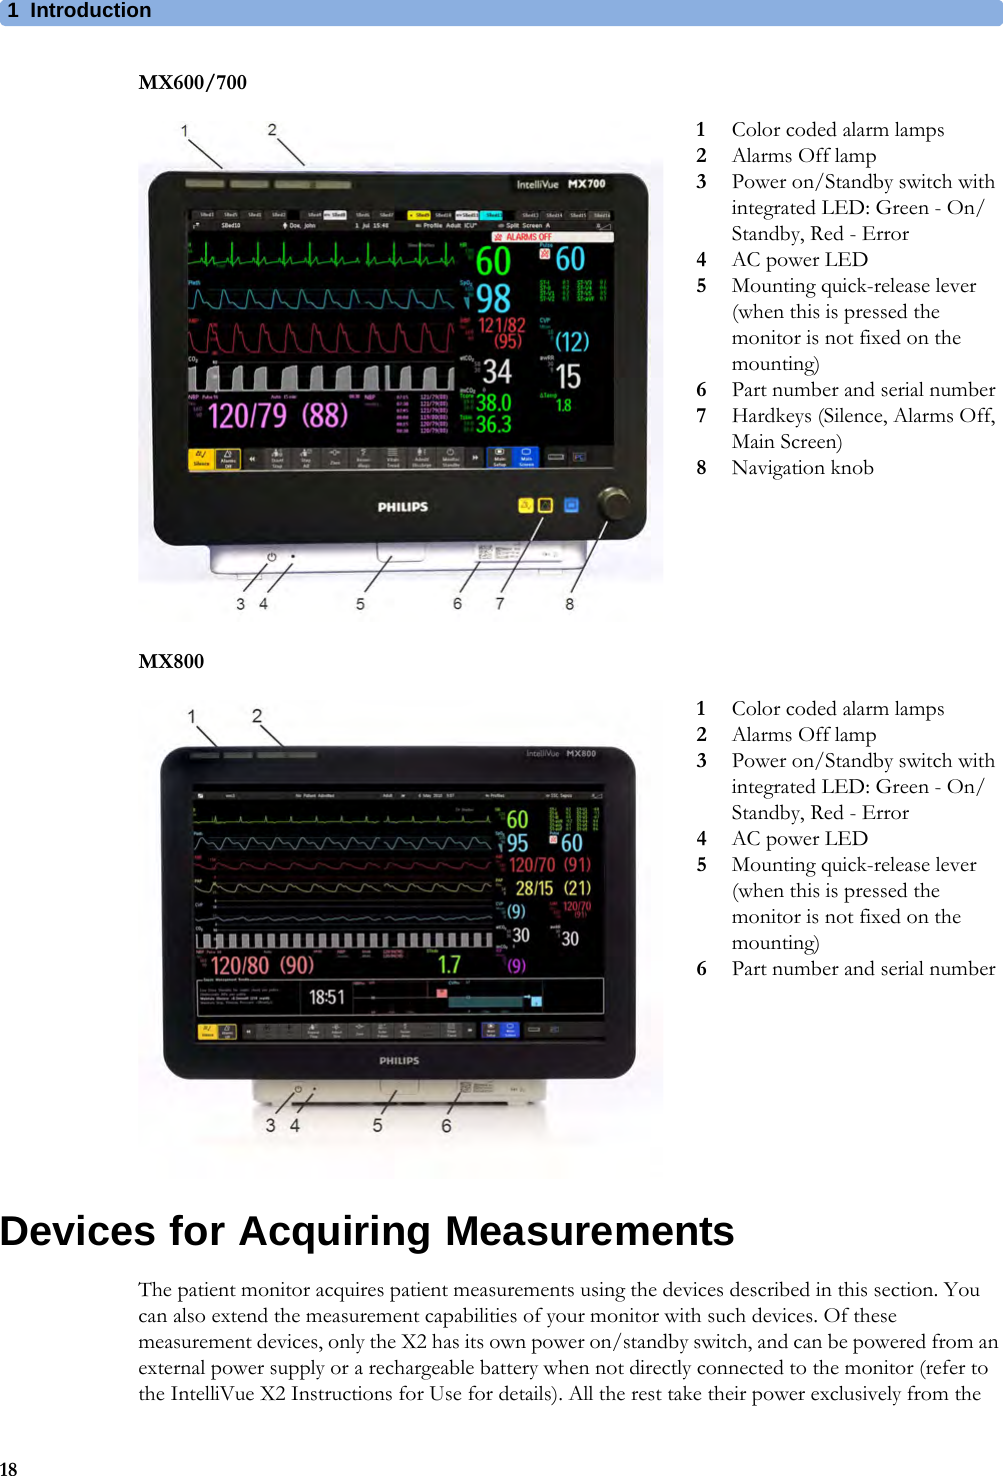 1Introduction18MX600/700MX800Devices for Acquiring MeasurementsThe patient monitor acquires patient measurements using the devices described in this section. You can also extend the measurement capabilities of your monitor with such devices. Of these measurement devices, only the X2 has its own power on/standby switch, and can be powered from an external power supply or a rechargeable battery when not directly connected to the monitor (refer to the IntelliVue X2 Instructions for Use for details). All the rest take their power exclusively from the 1Color coded alarm lamps2Alarms Off lamp3Power on/Standby switch with integrated LED: Green - On/Standby, Red - Error4AC power LED5Mounting quick-release lever (when this is pressed the monitor is not fixed on the mounting)6Part number and serial number7Hardkeys (Silence, Alarms Off, Main Screen)8Navigation knob1Color coded alarm lamps2Alarms Off lamp3Power on/Standby switch with integrated LED: Green - On/Standby, Red - Error4AC power LED5Mounting quick-release lever (when this is pressed the monitor is not fixed on the mounting)6Part number and serial number